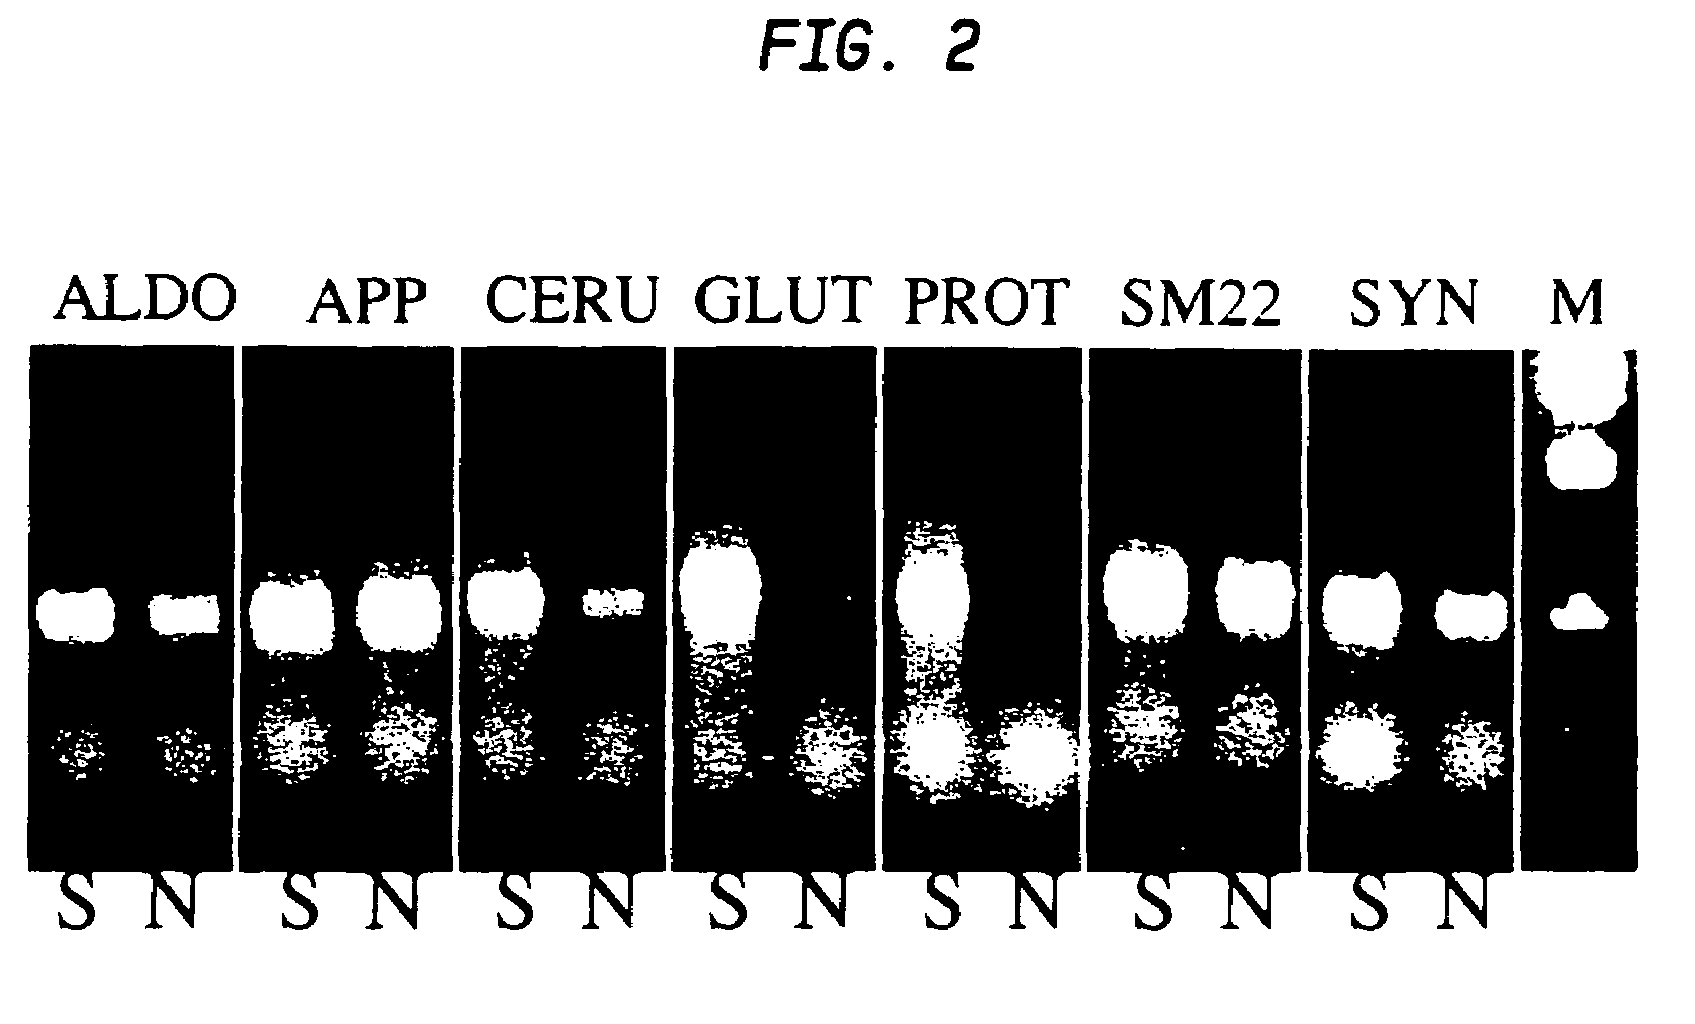 Multi-lineage directed induction of bone marrow stromal cell differentiation